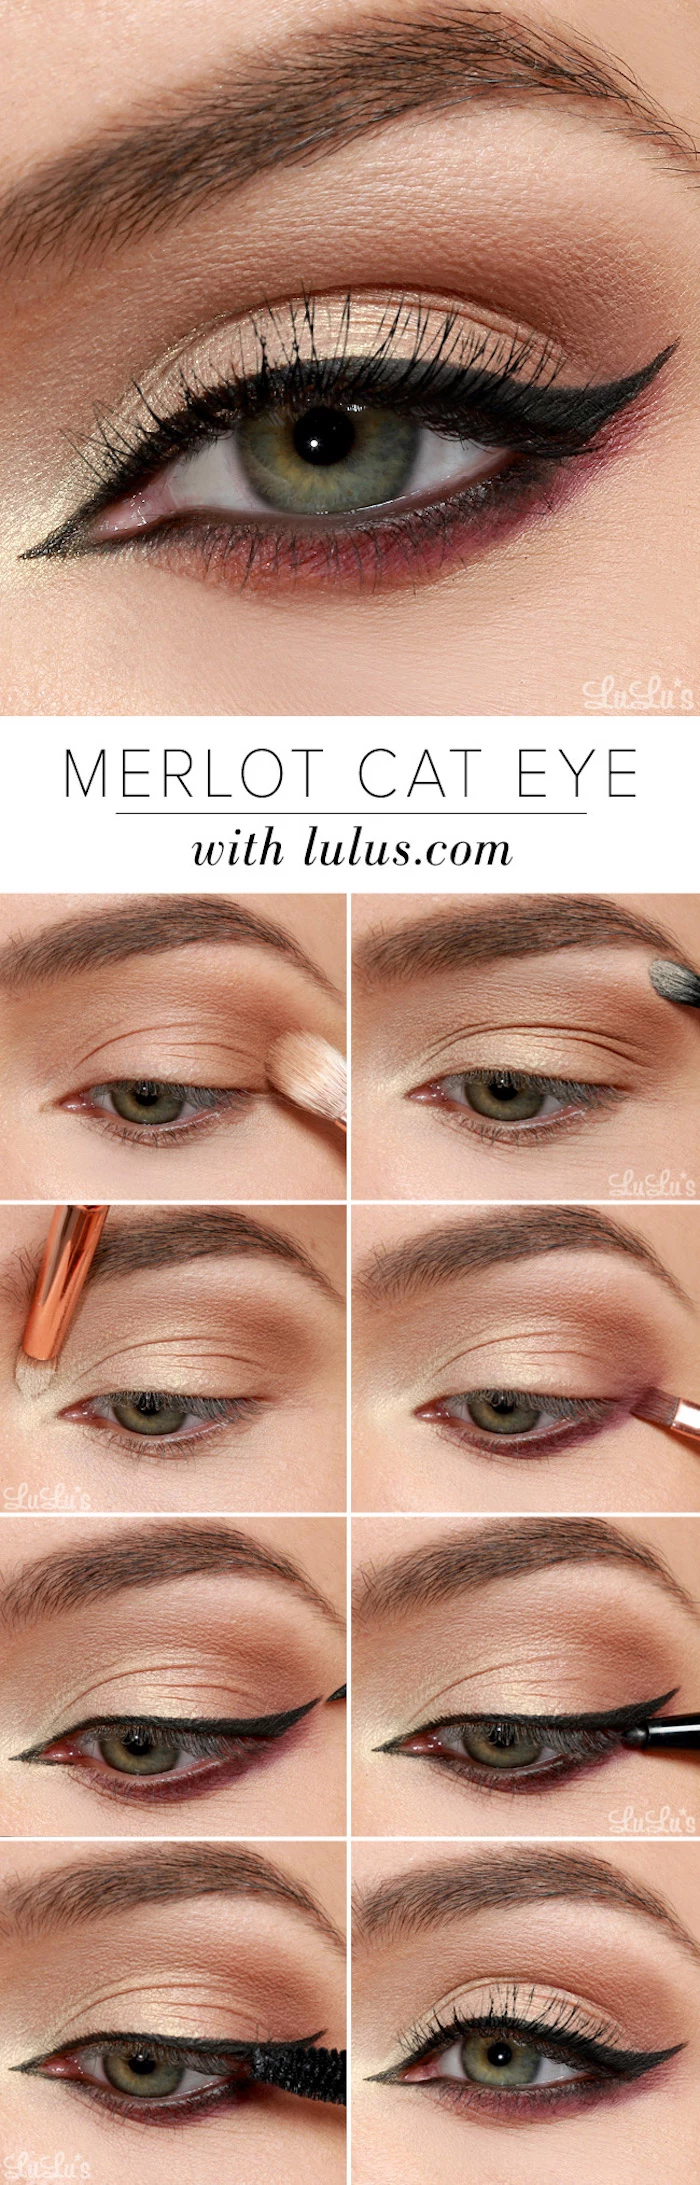 merlot cat eye step by step tutorial on woman with green eyes winged eyeliner tutorial photo collage